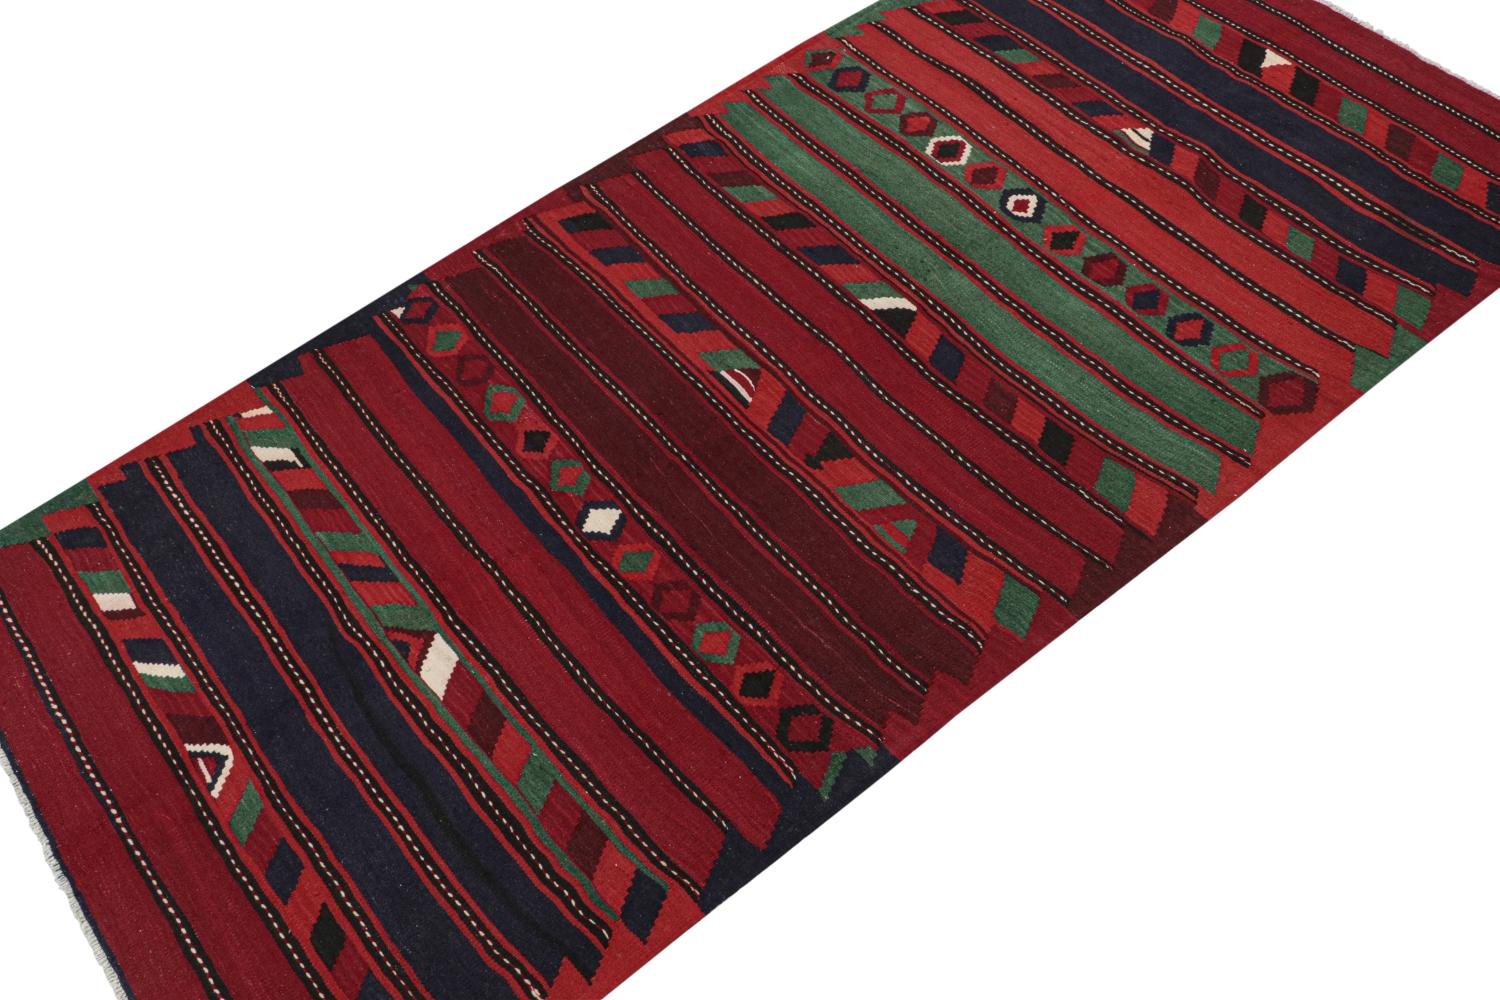 Hand-Knotted Vintage Persian Bidjar Kilim in Red, Blue and Green Geometric Patterns For Sale